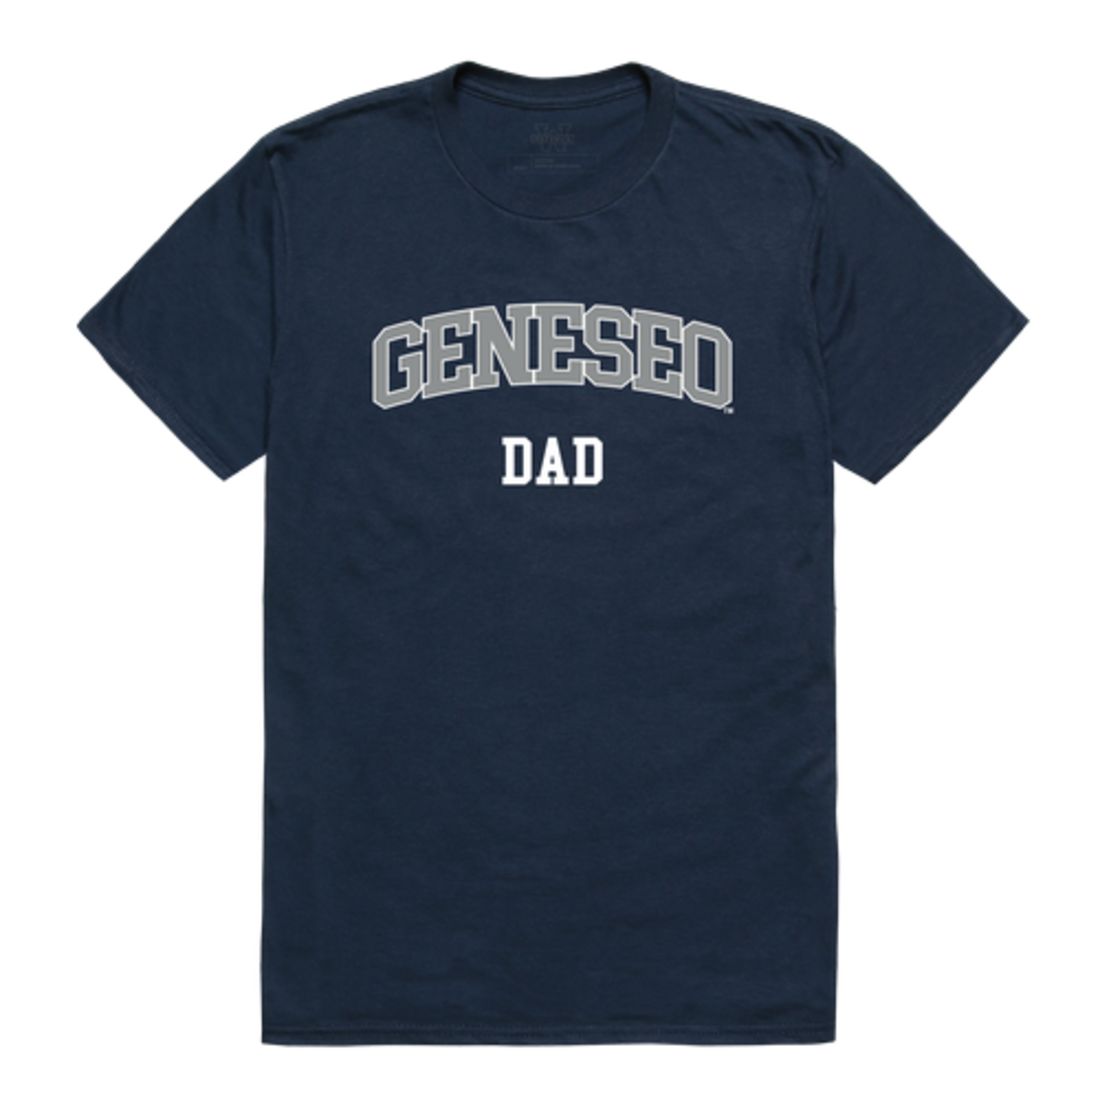 State University of New York at Geneseo Knights Dad T-Shirt